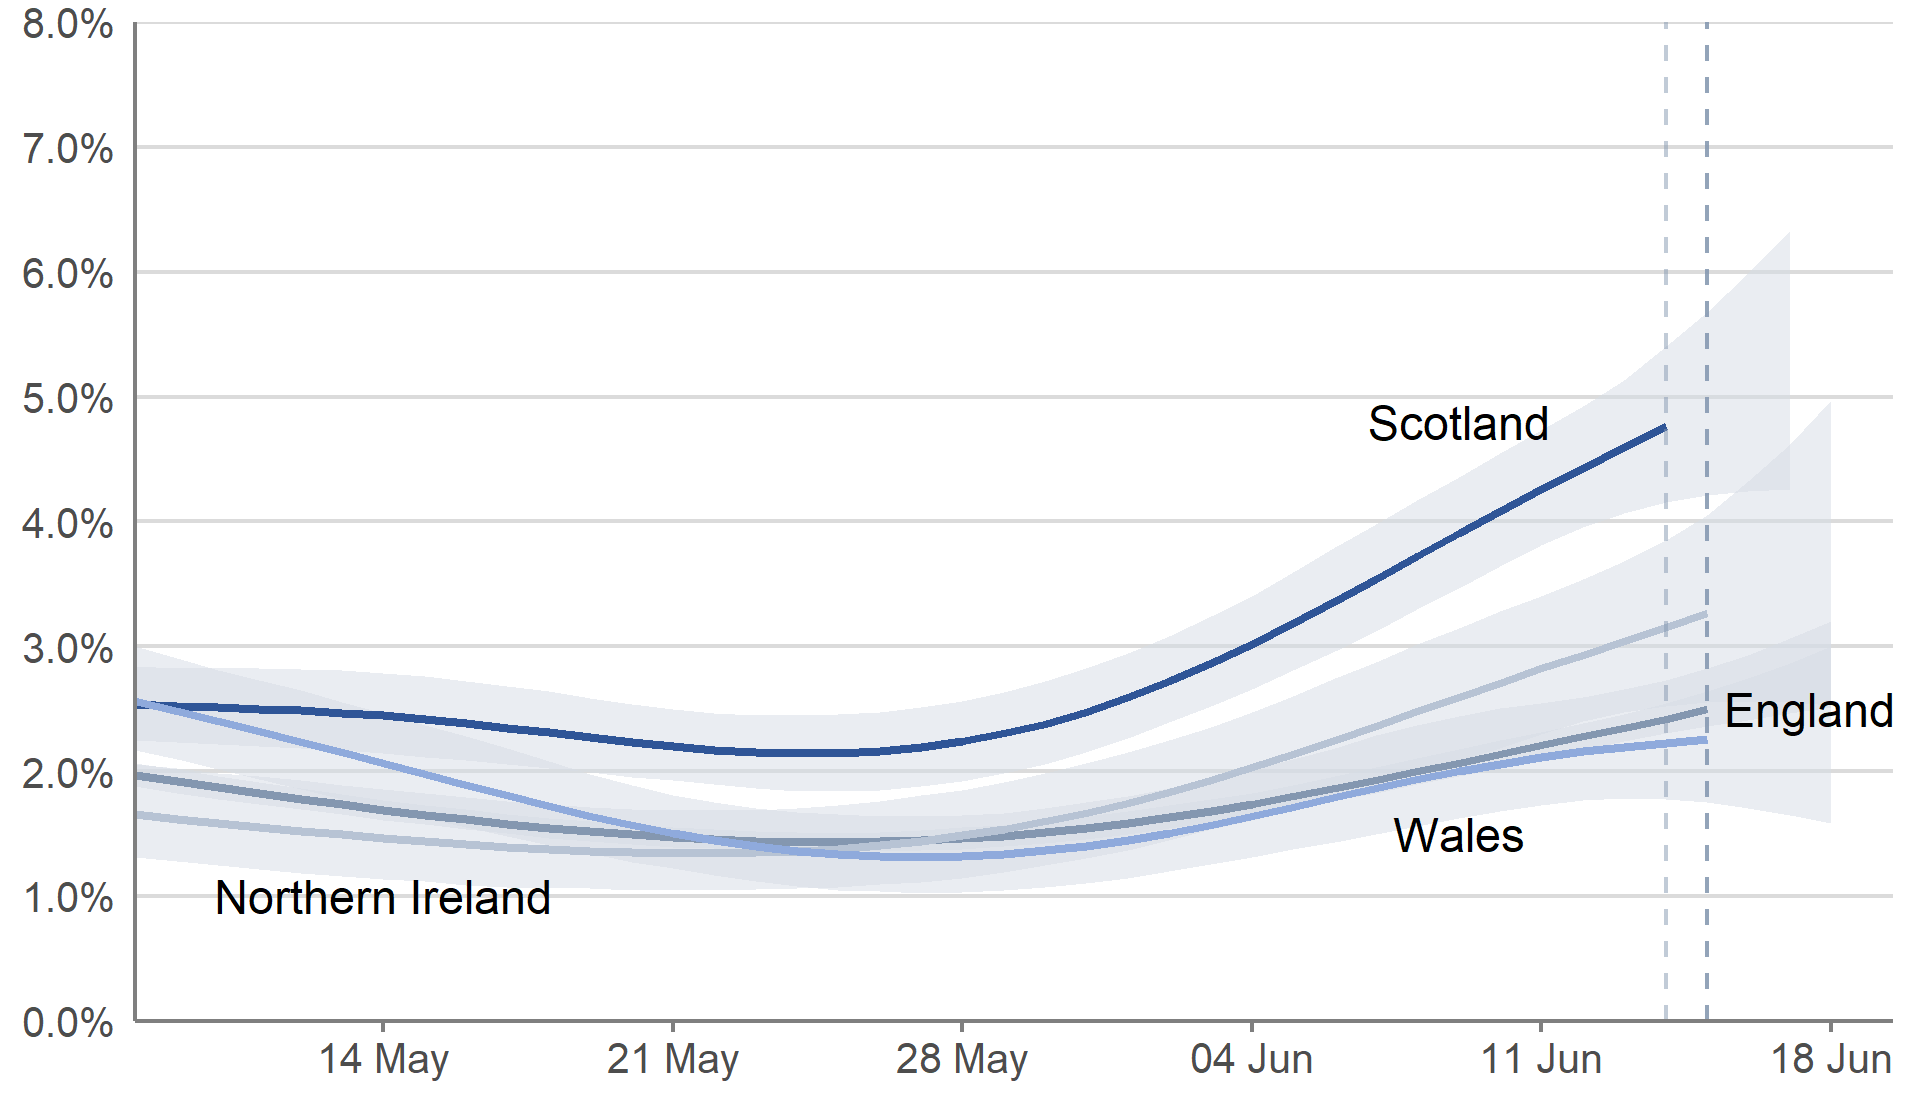 Figure 4: Modelled daily estimates of the percentage of the population testing positive for COVID-19 in the four UK nations, between 7 May and 17 June 2022 for Scotland, and 7 May and 18 June for England, Wales and Northern Ireland, including 95% credible intervals   A line chart showing modelled daily estimates of the percentage of the population testing positive for COVID-19 in each of the four nations of the UK, between 7 May and 17 June 2022 for Scotland, and 7 May and 18 June for England, Wales and Northern Ireland. Modelled daily estimates are represented by four lines with 95% credible intervals in pale blue shading. The lines are dark blue for Scotland, light blue for Wales, dark grey for England and light grey for Northern Ireland. A vertical dashed line near the end of the series indicating greater uncertainty in estimates for the last three reported days. In the most recent week, (11 to 17 June 2022 for Scotland, 12 to 18 June for England, Wales and Northern Ireland), the estimated percentage of people testing positive for COVID-19 increased in all four nations.